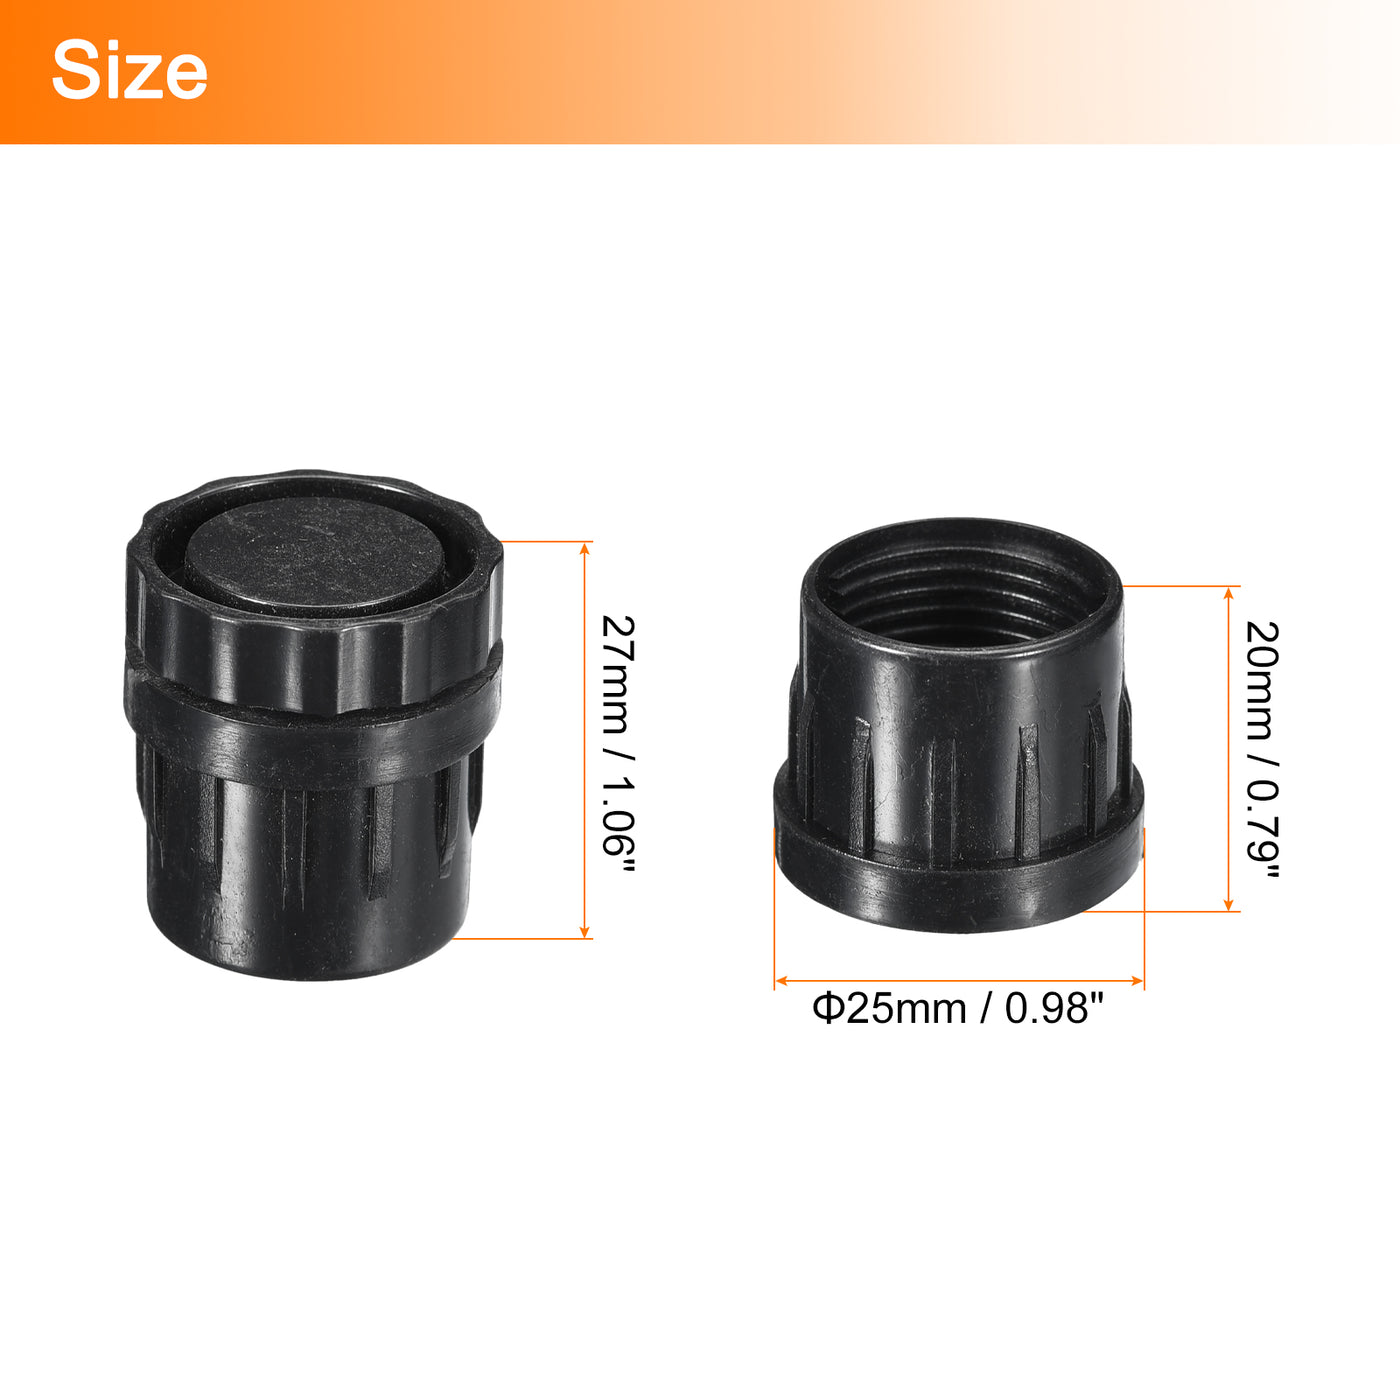 uxcell Uxcell 4Pcs Inserts for Round Tubes with Leveling Feet, for 25mm/0.98" Dia Round Tube